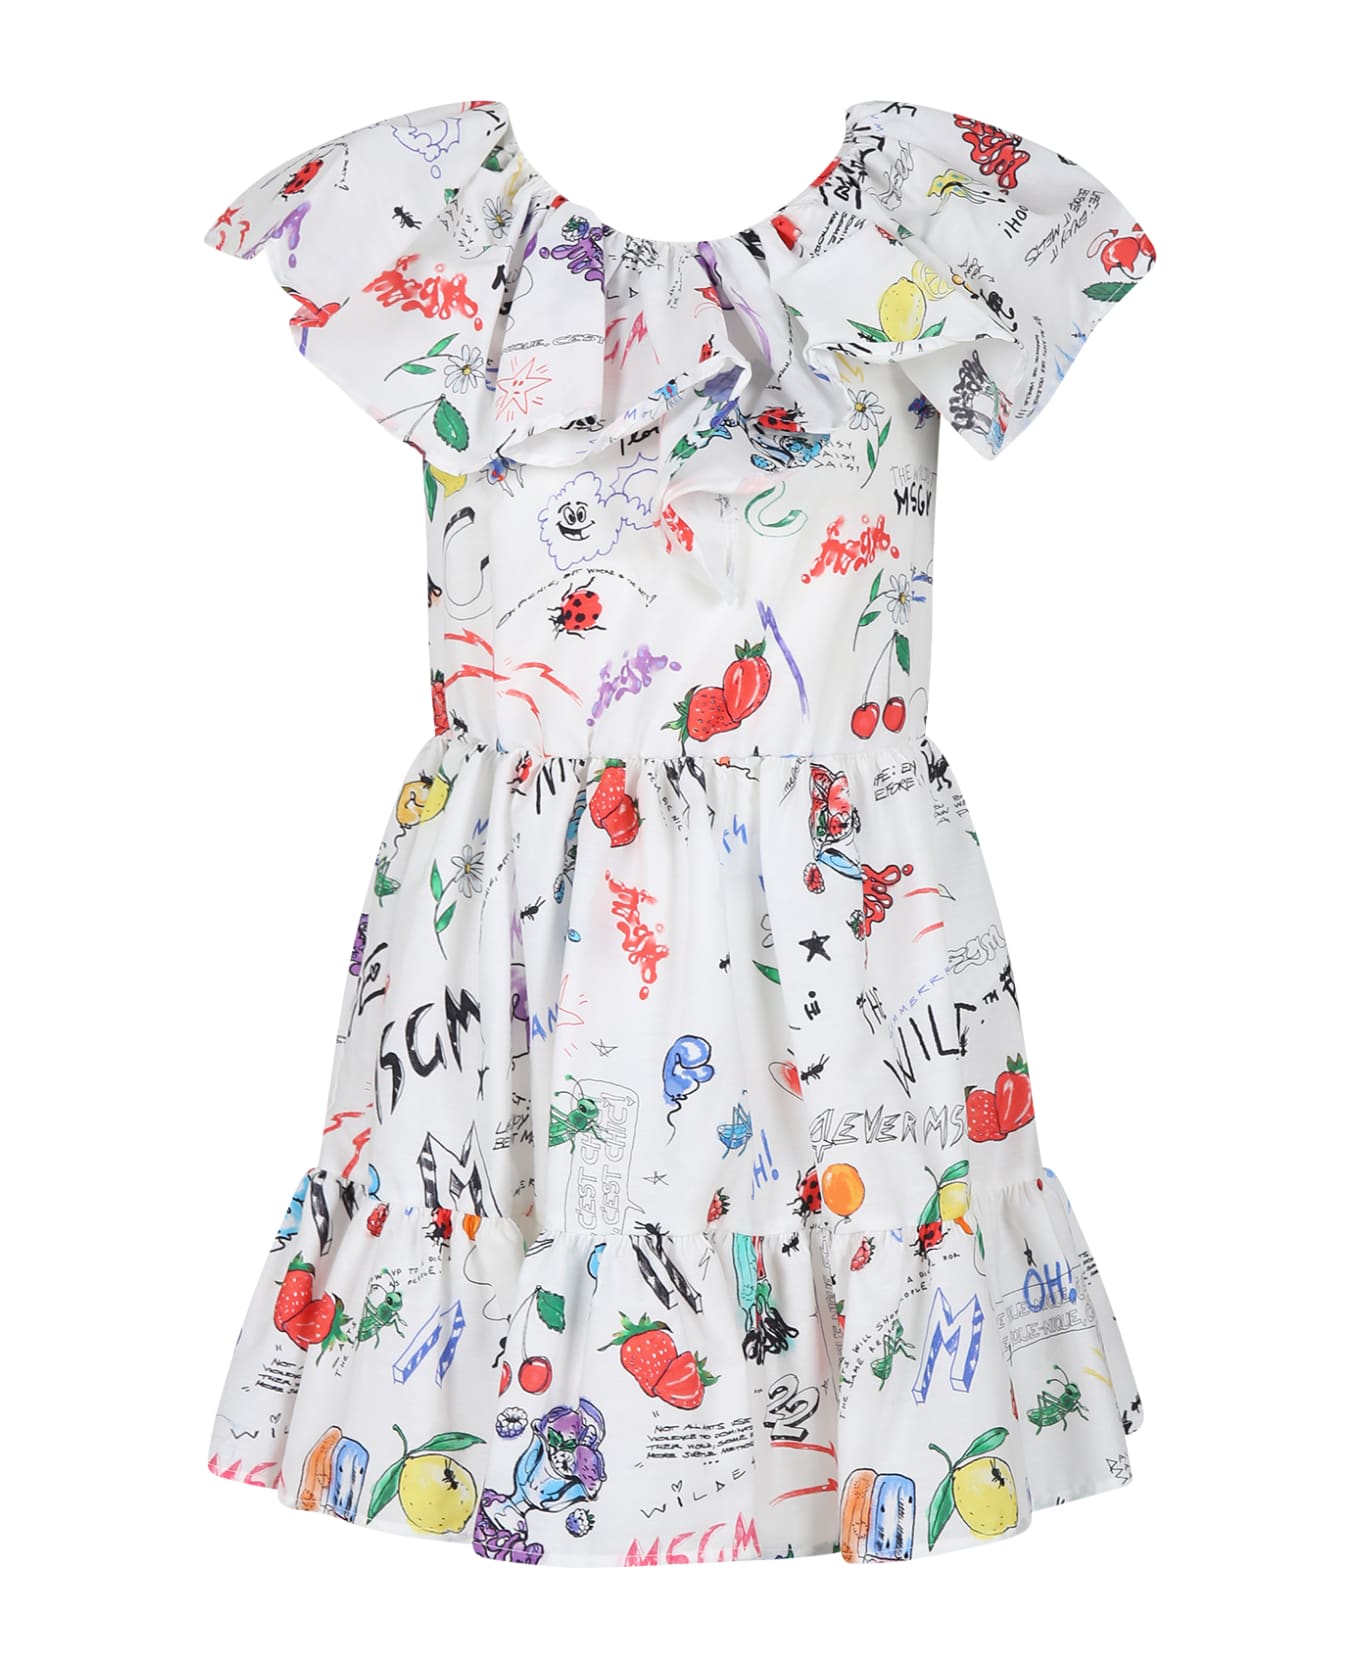 MSGM White Dress For Girl With Comic Print - White